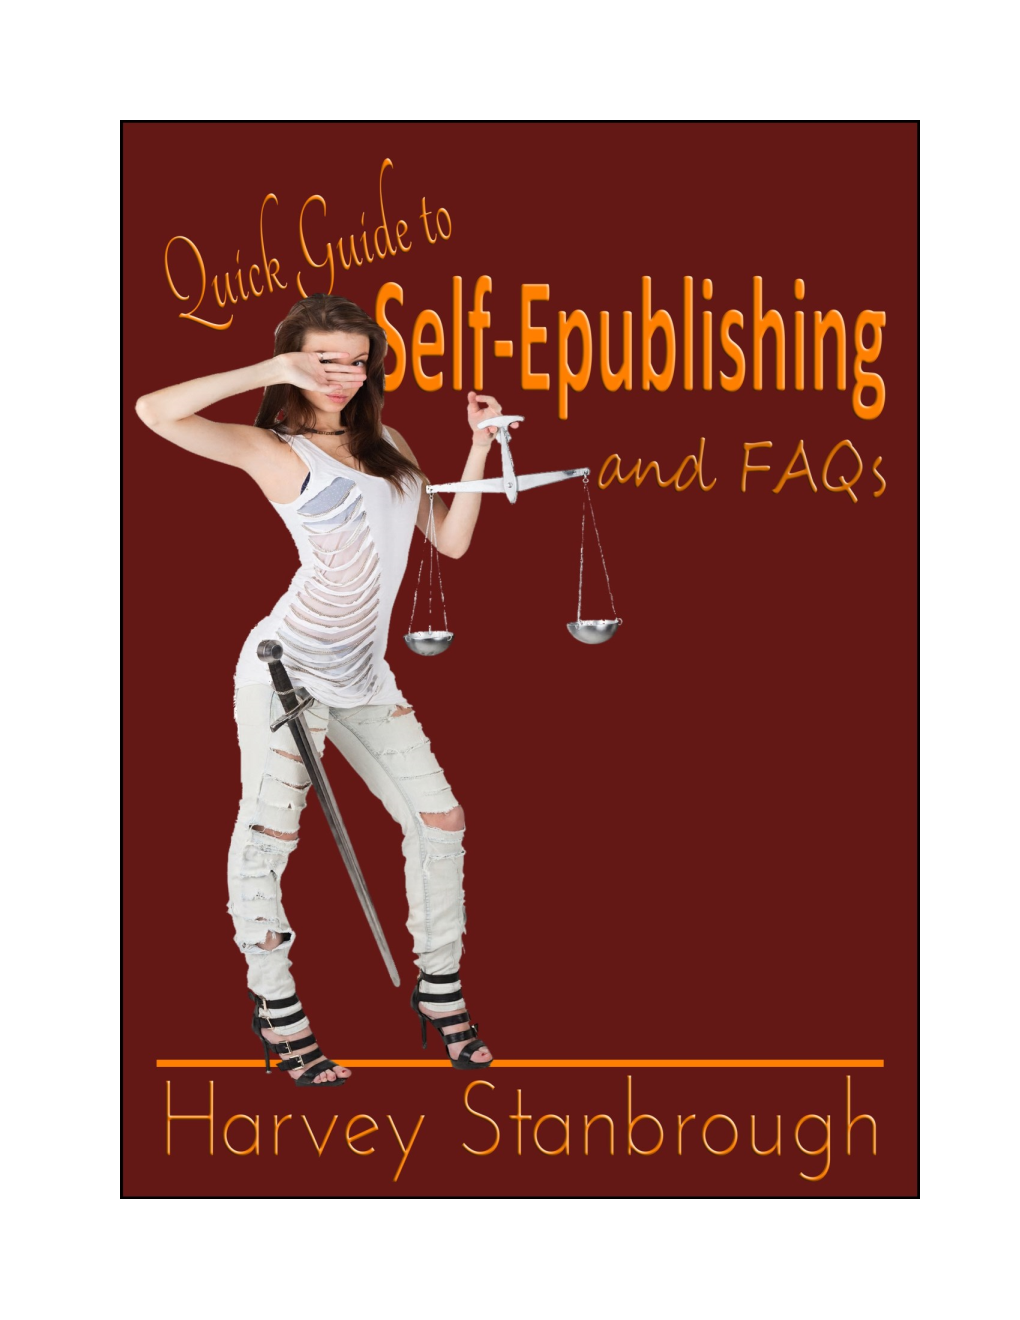 Quick Guide to Self-Publishing & Faqs